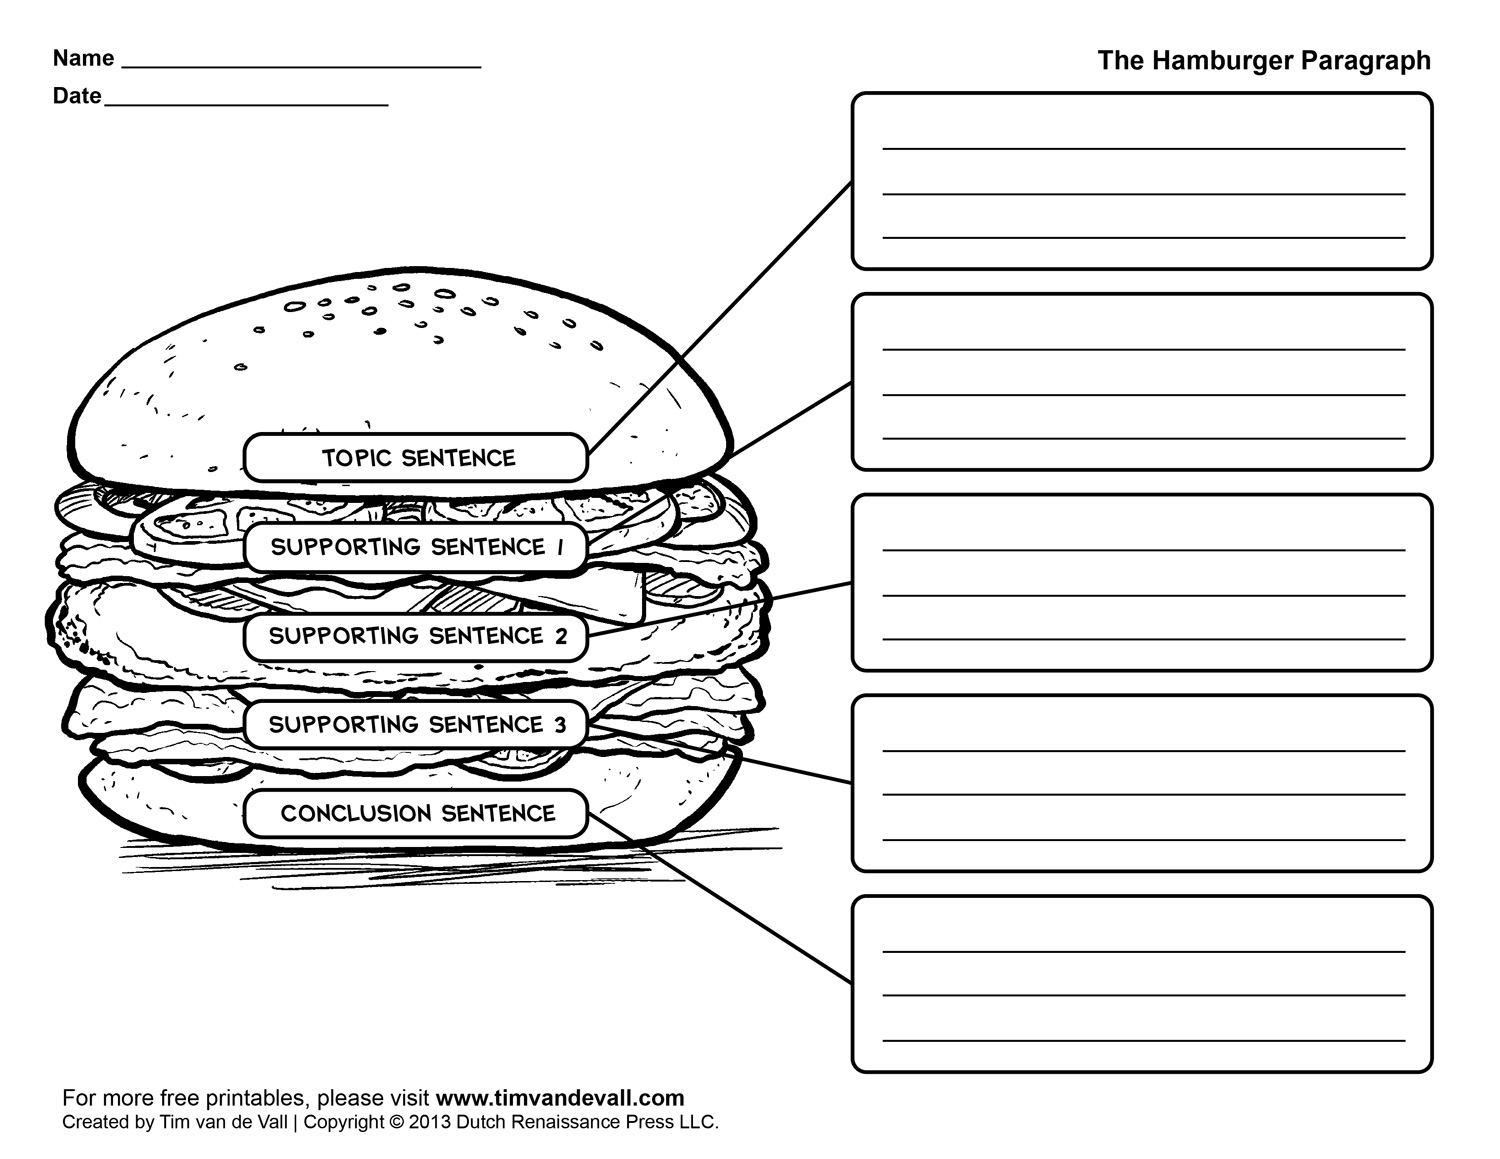 11-graphic-organizer-template-images-frayer-model-graphic-organizer-template-science-graphic